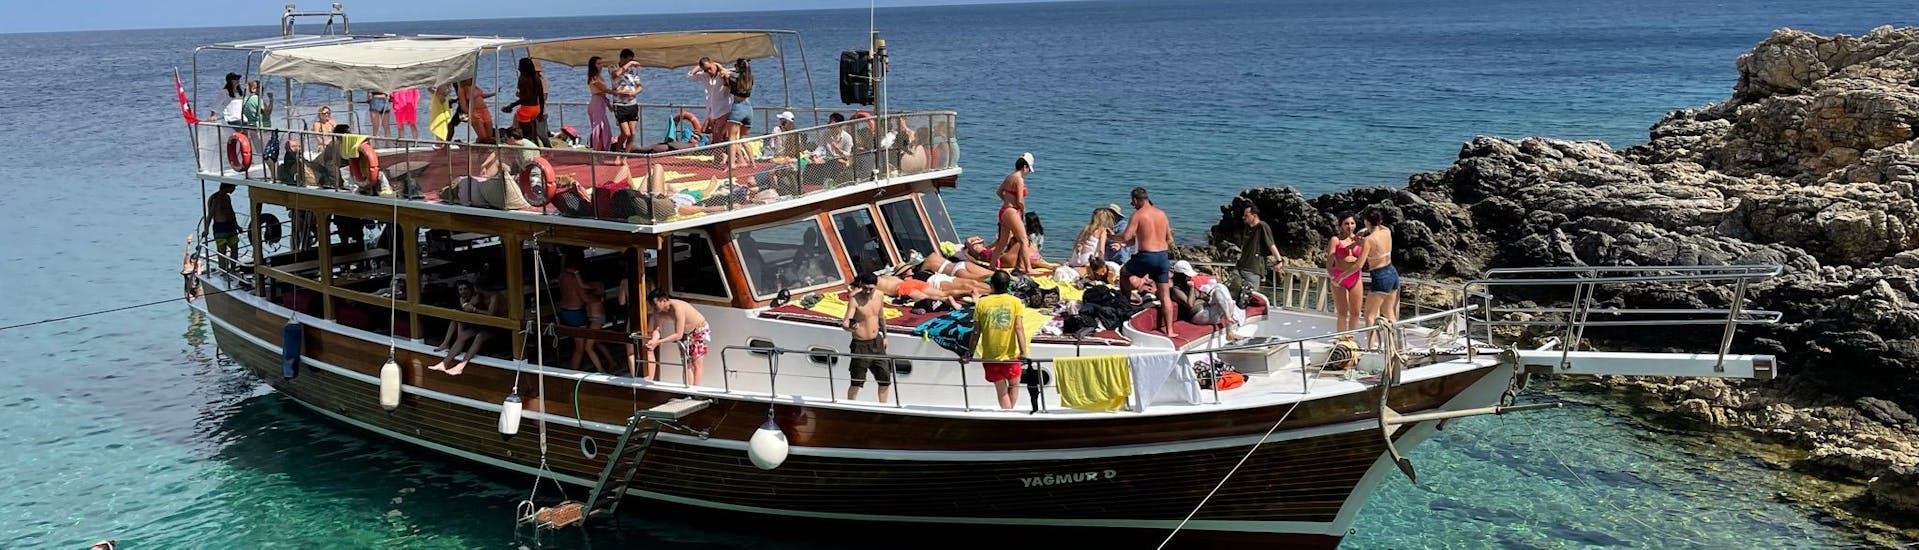 The boat filled with people and swimming next to it during one the stops of the Boat Tour in Bodrum with Swimming Stops from Yagmur D Bodrum.